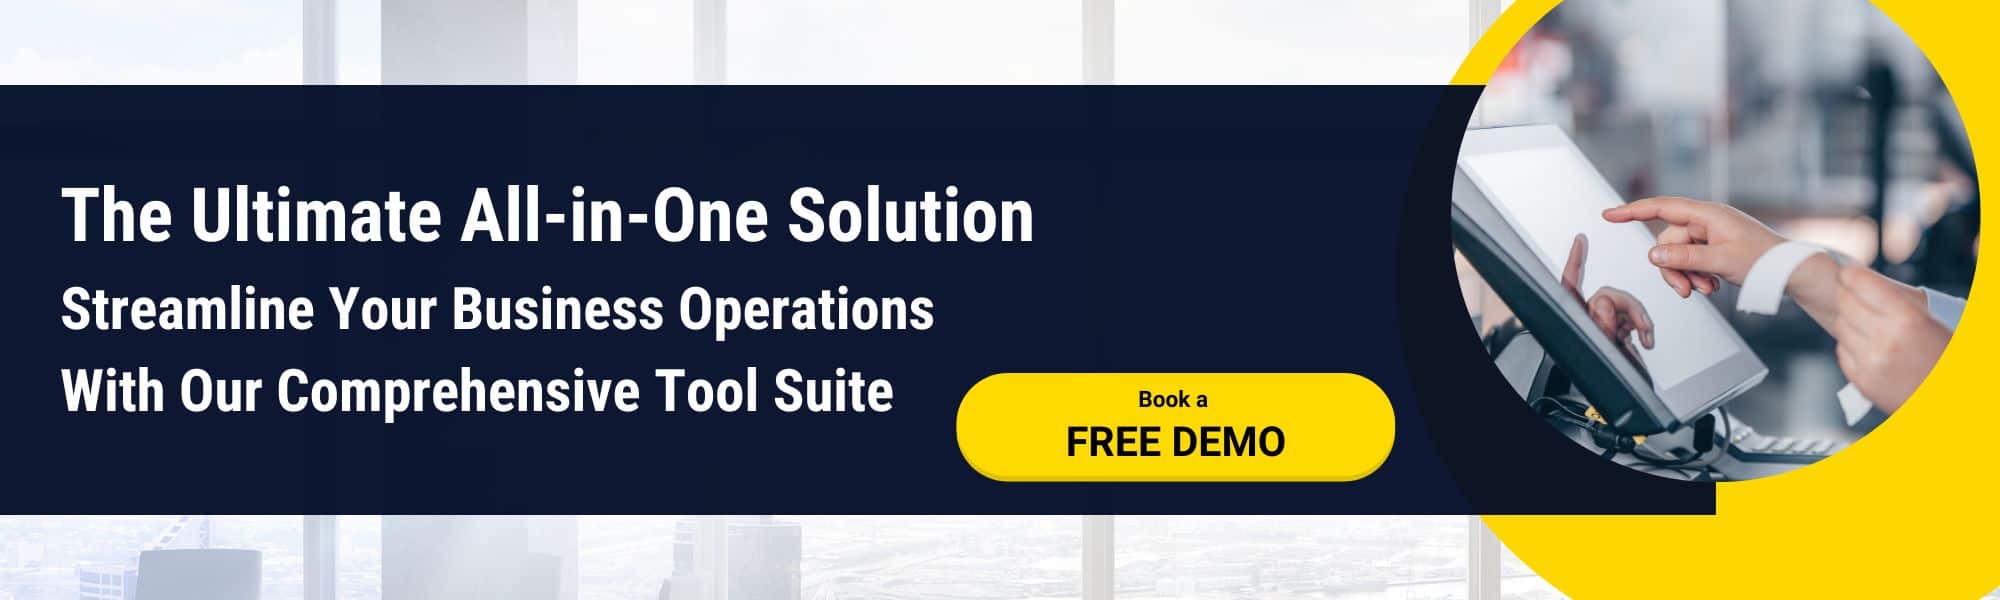 Image of a call to action banner promoting Equip Rewards The banner text reads 'The ultimate all-in-one solution: Streamline your business operations with our comprehensive tool suite', encouraging businesses to gain an advantage in their market with these solutions.